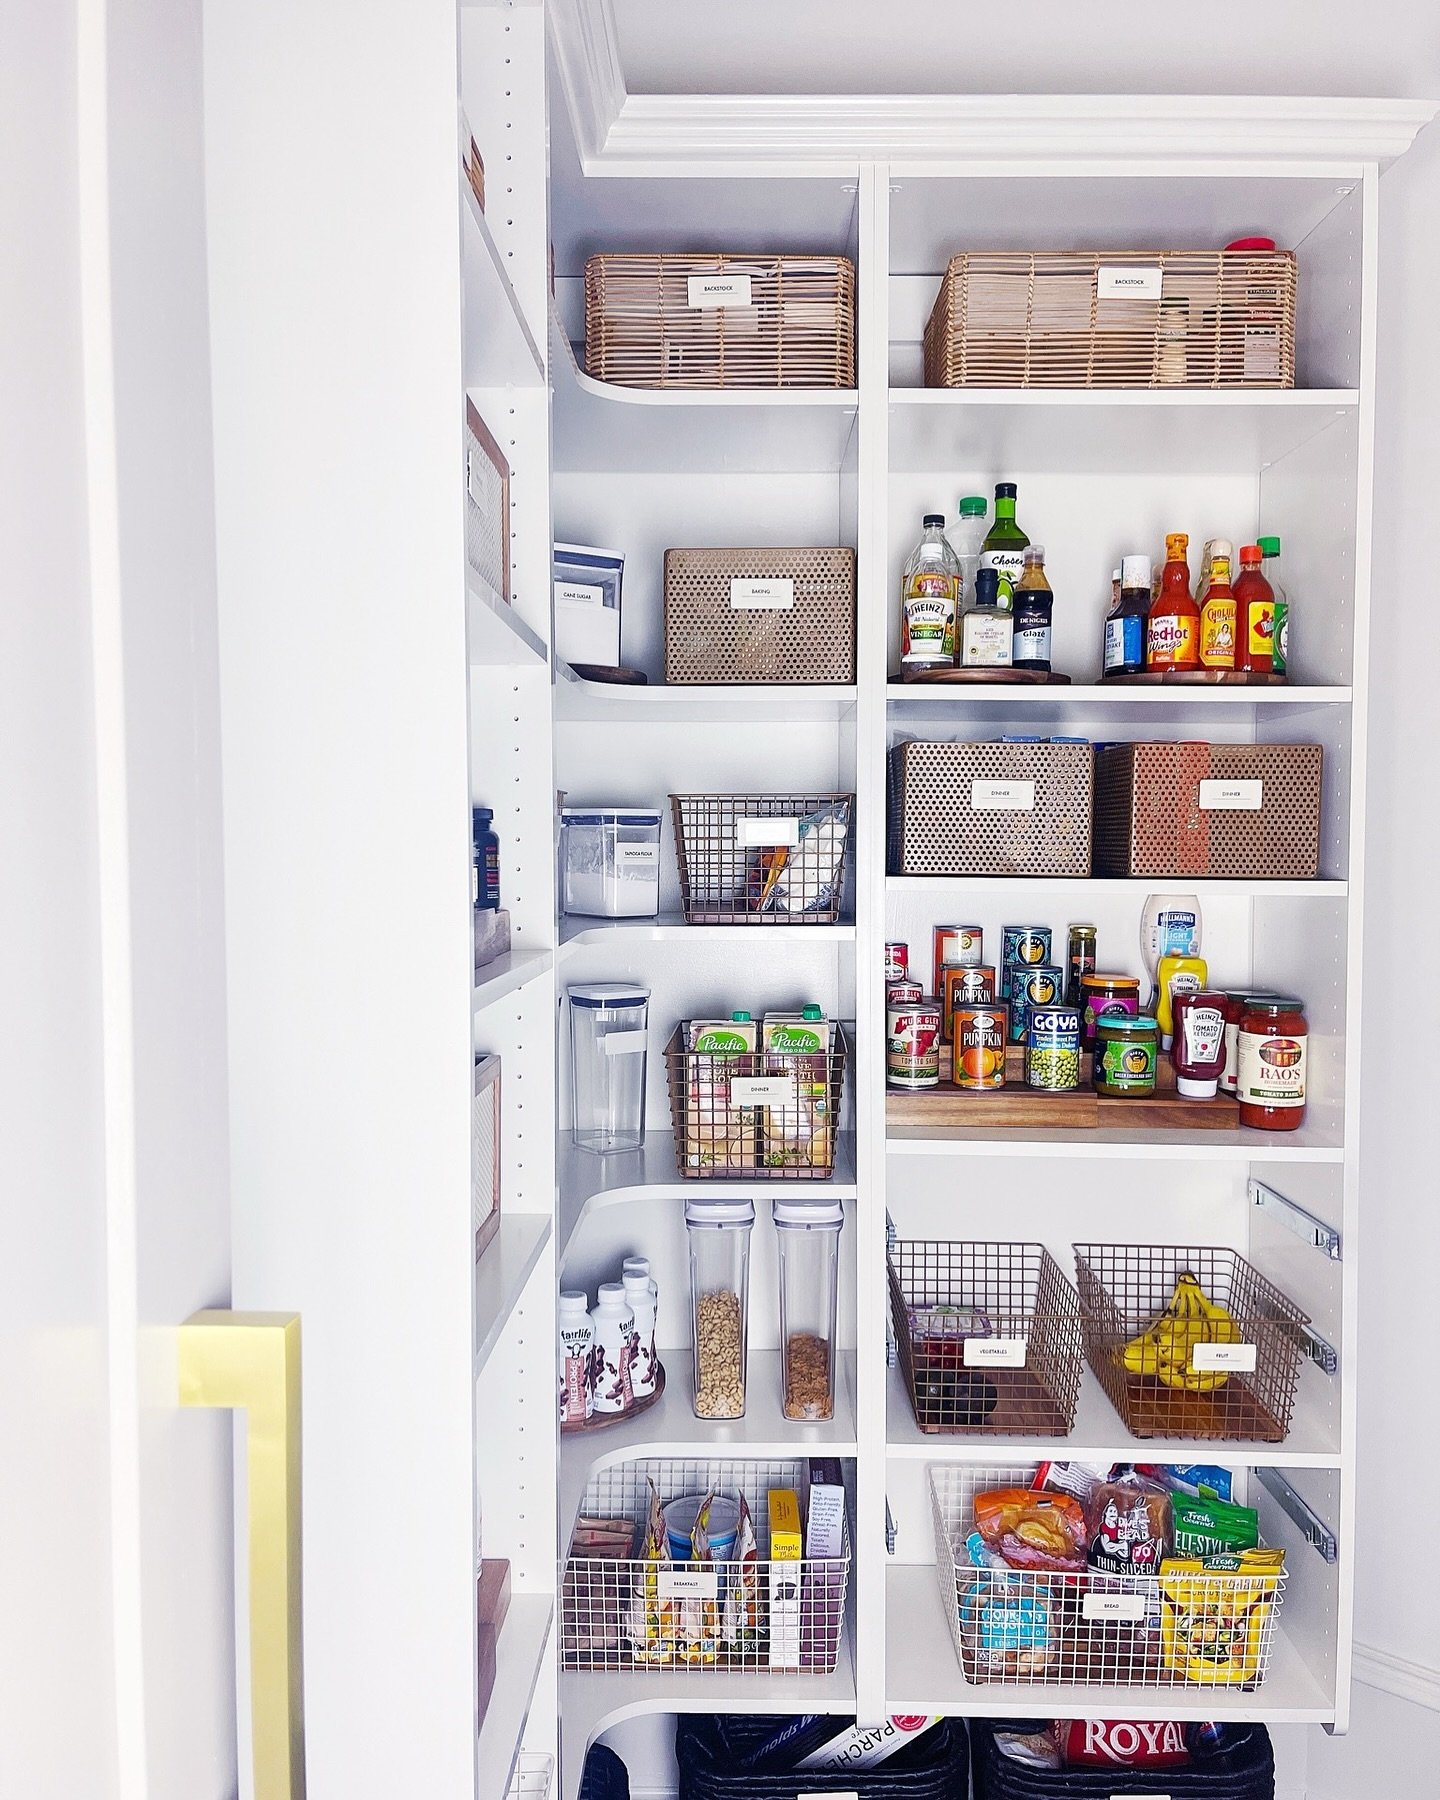 WEDNESDAYS⁣
⁣
A little pantry eye candy for your mid week slump. Happy Wednesday, y&rsquo;all!⁣
⁣
#organizedsimplicity #home #organization #professionalorganizers #atlanta #organizedhome #atlantaorganizers #homeorganization #organizing⁣
⁣
Follow my s